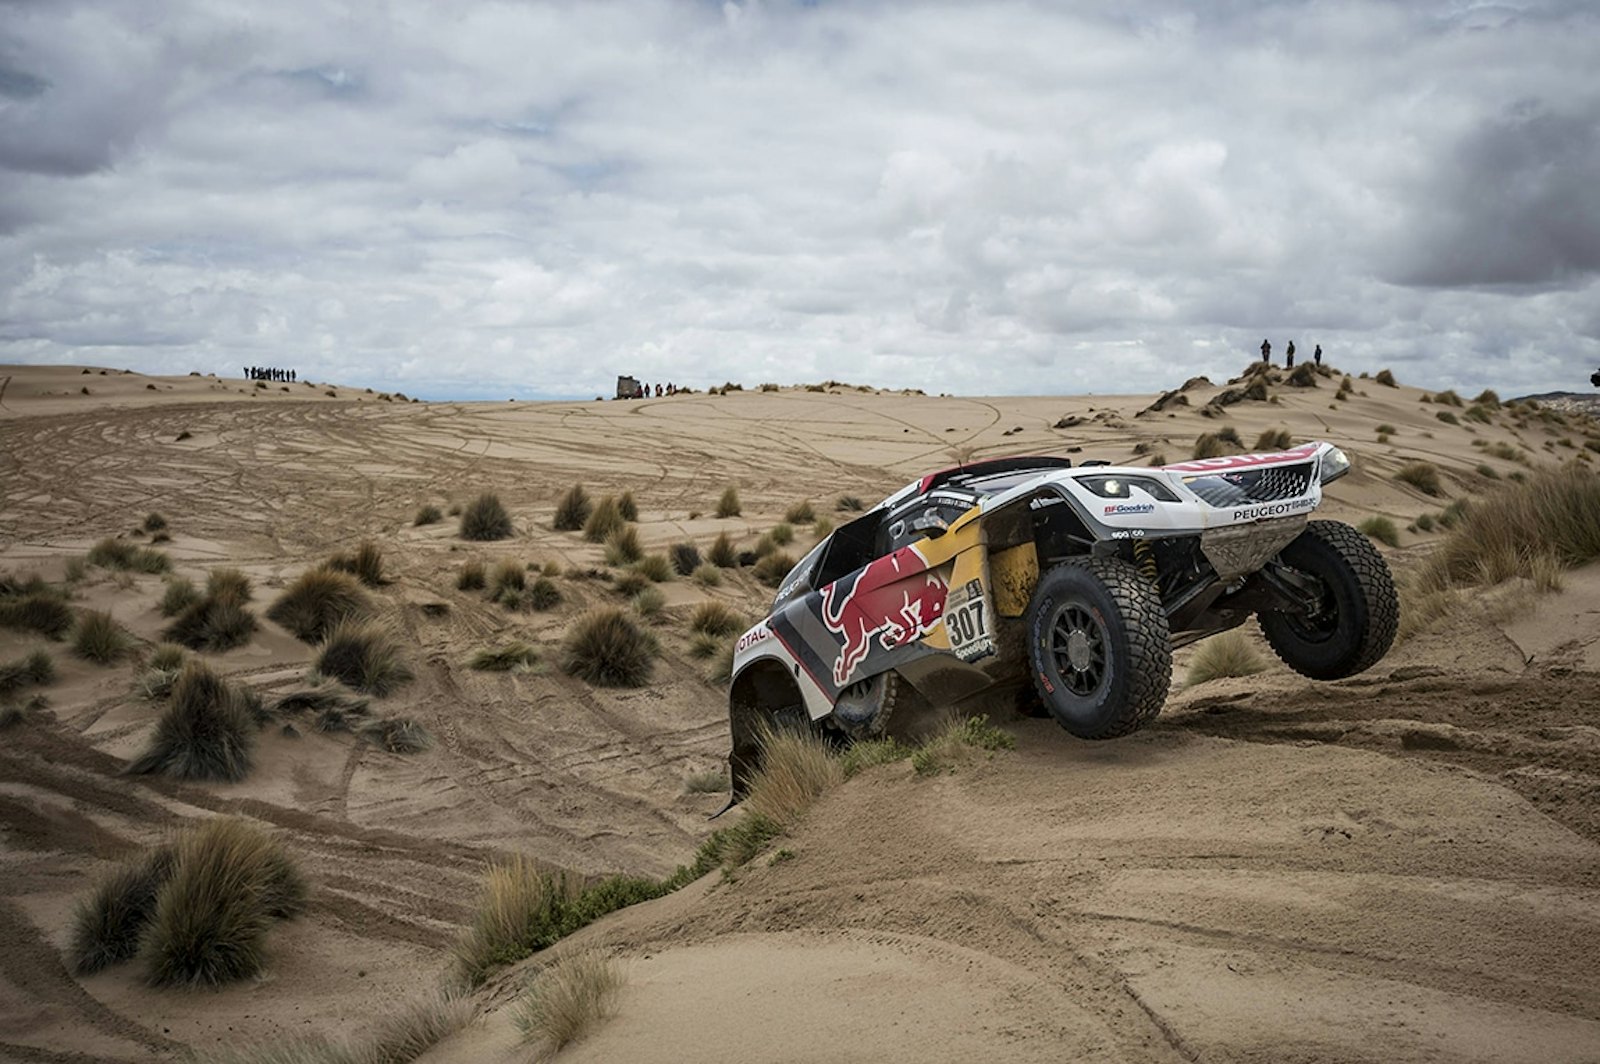 Cyril Despres (FRA) of Team Peugeot Total races during stage 07 of Rally Dakar 2017 from La Paz to Uyuni, Bolivia on January 09, 2017 // Marcelo Maragni/Red Bull Content Pool // P-20170109-01306 // Usage for editorial use only // Please go to www.redbullcontentpool.com for further information. //